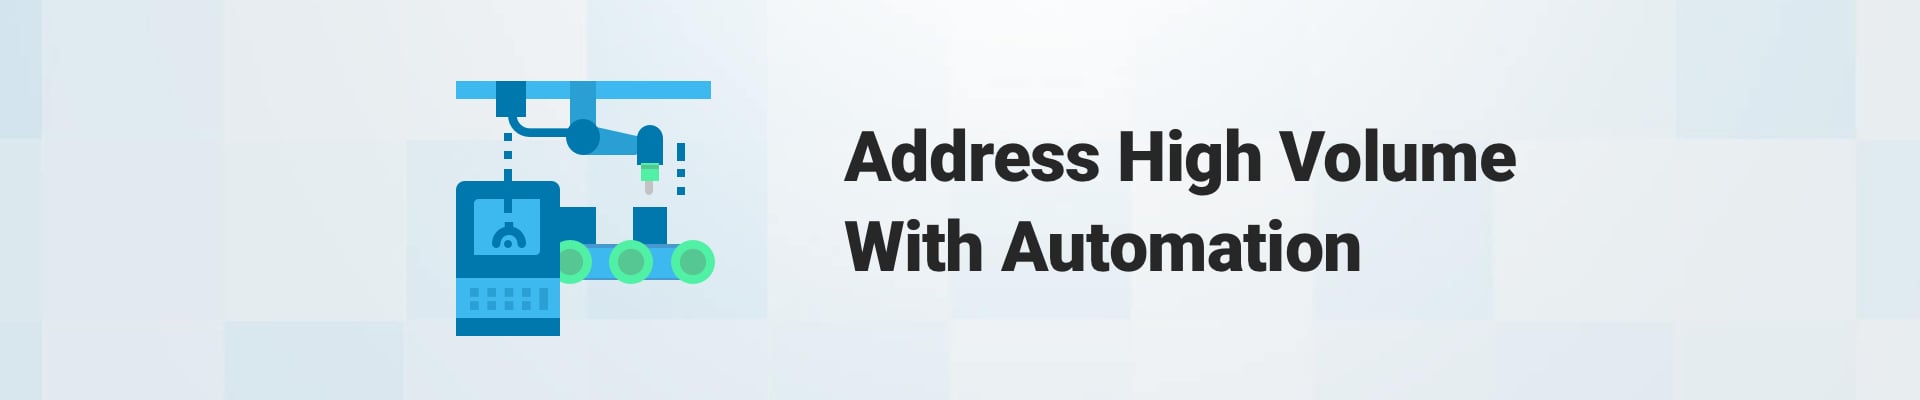 address high volume with automation